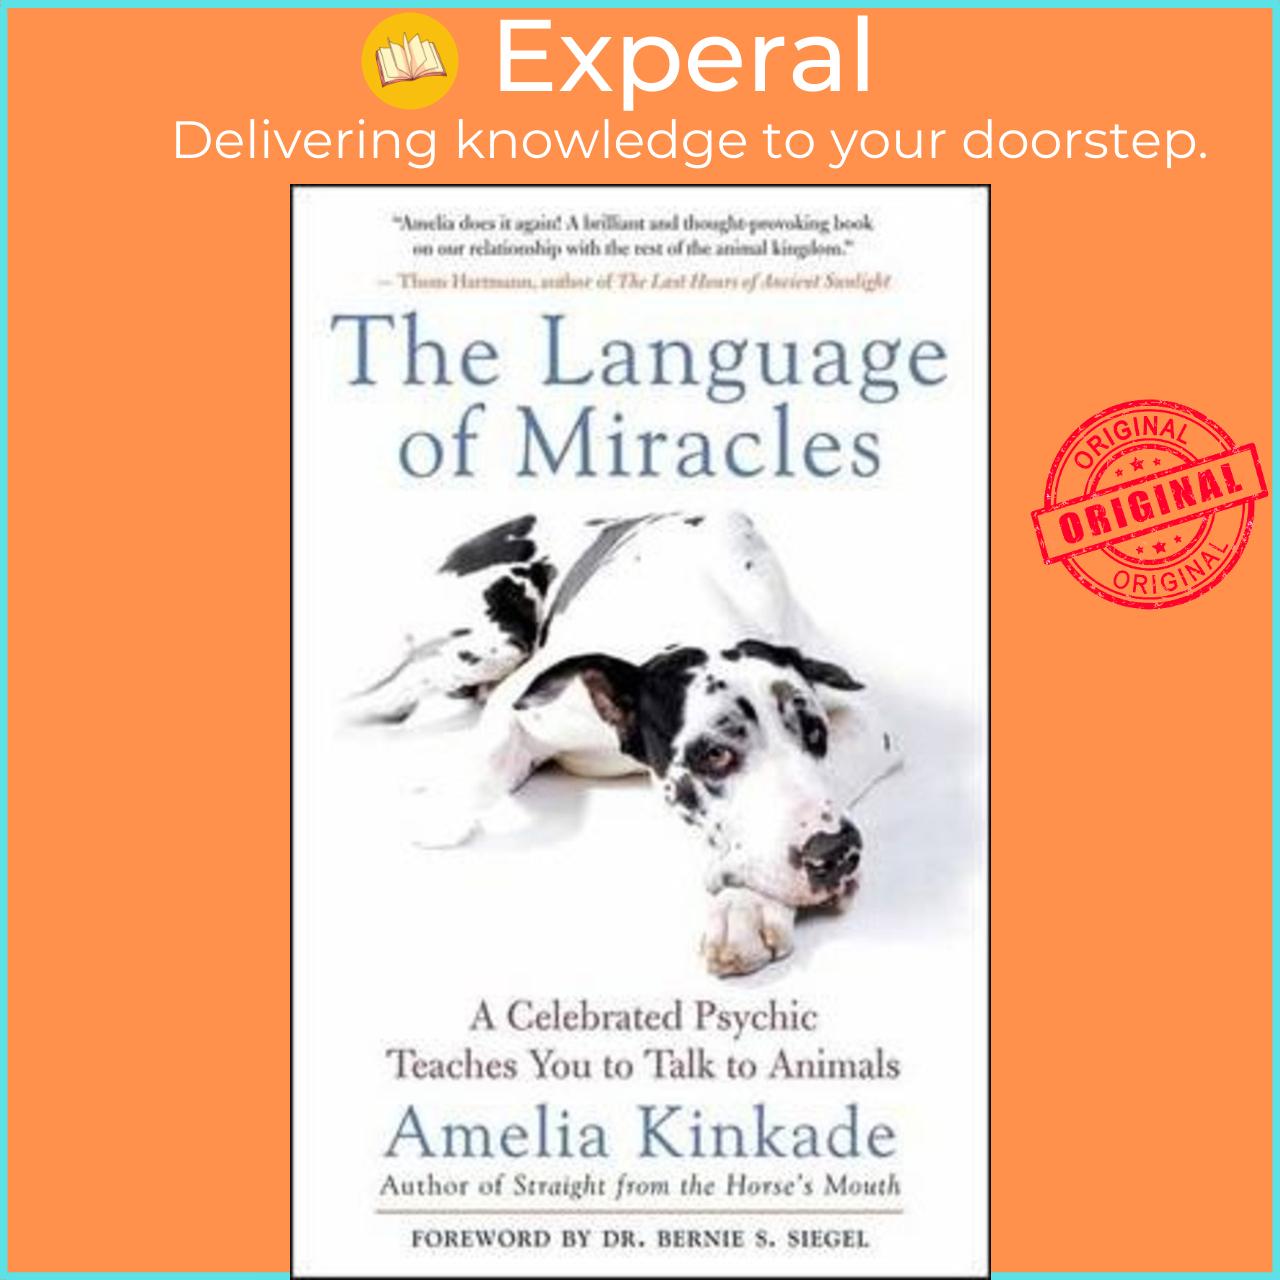 Mua Sách - The Language of Miracles : A Celebrated Psychic Teaches You to  Talk to by Amelia Kinkade (US edition, paperback) tại Experal